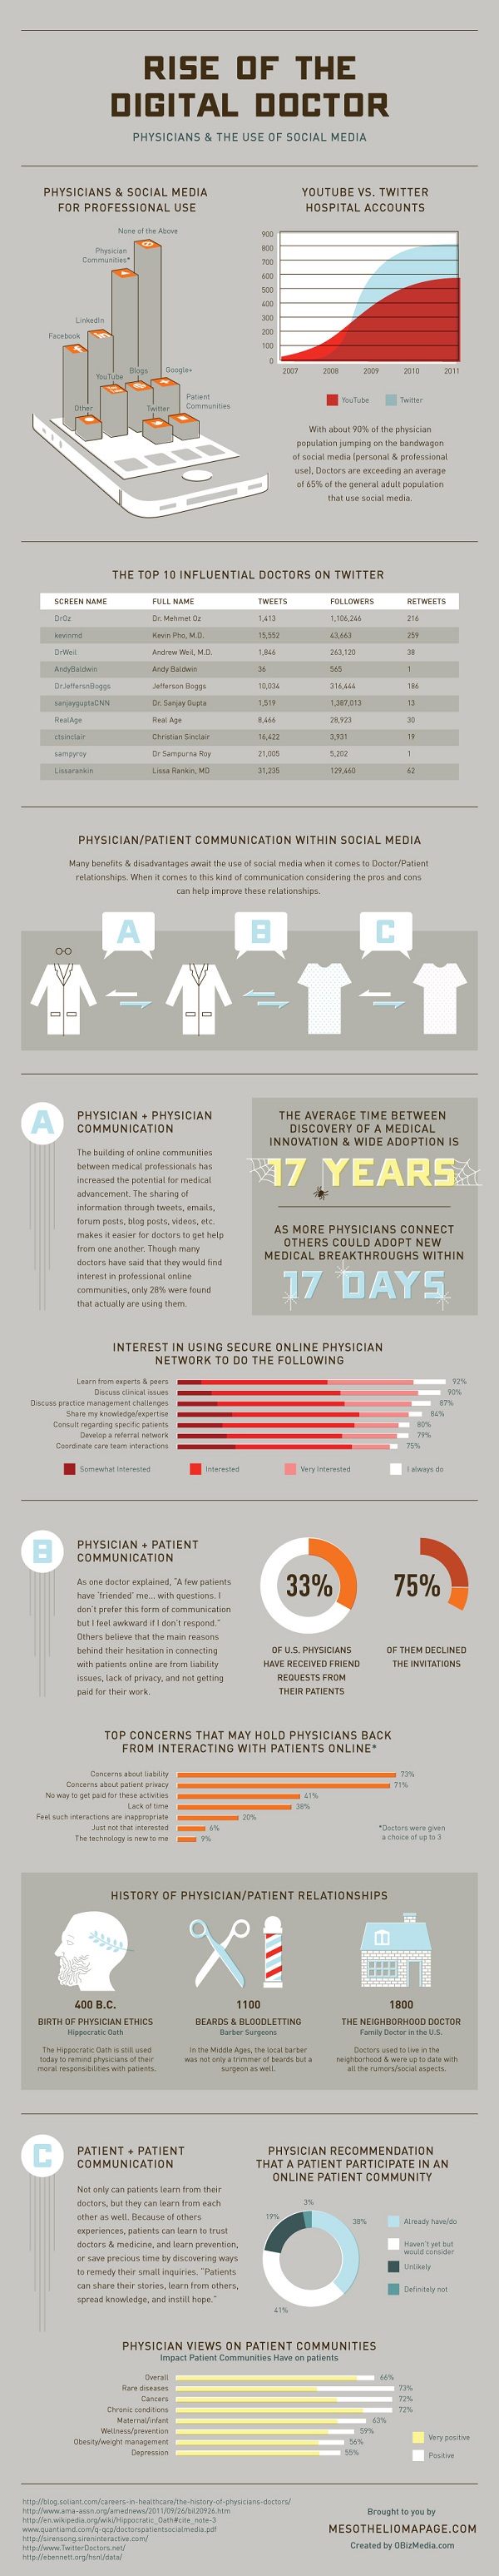 Rise of the Digital Doctor  | Infographic |